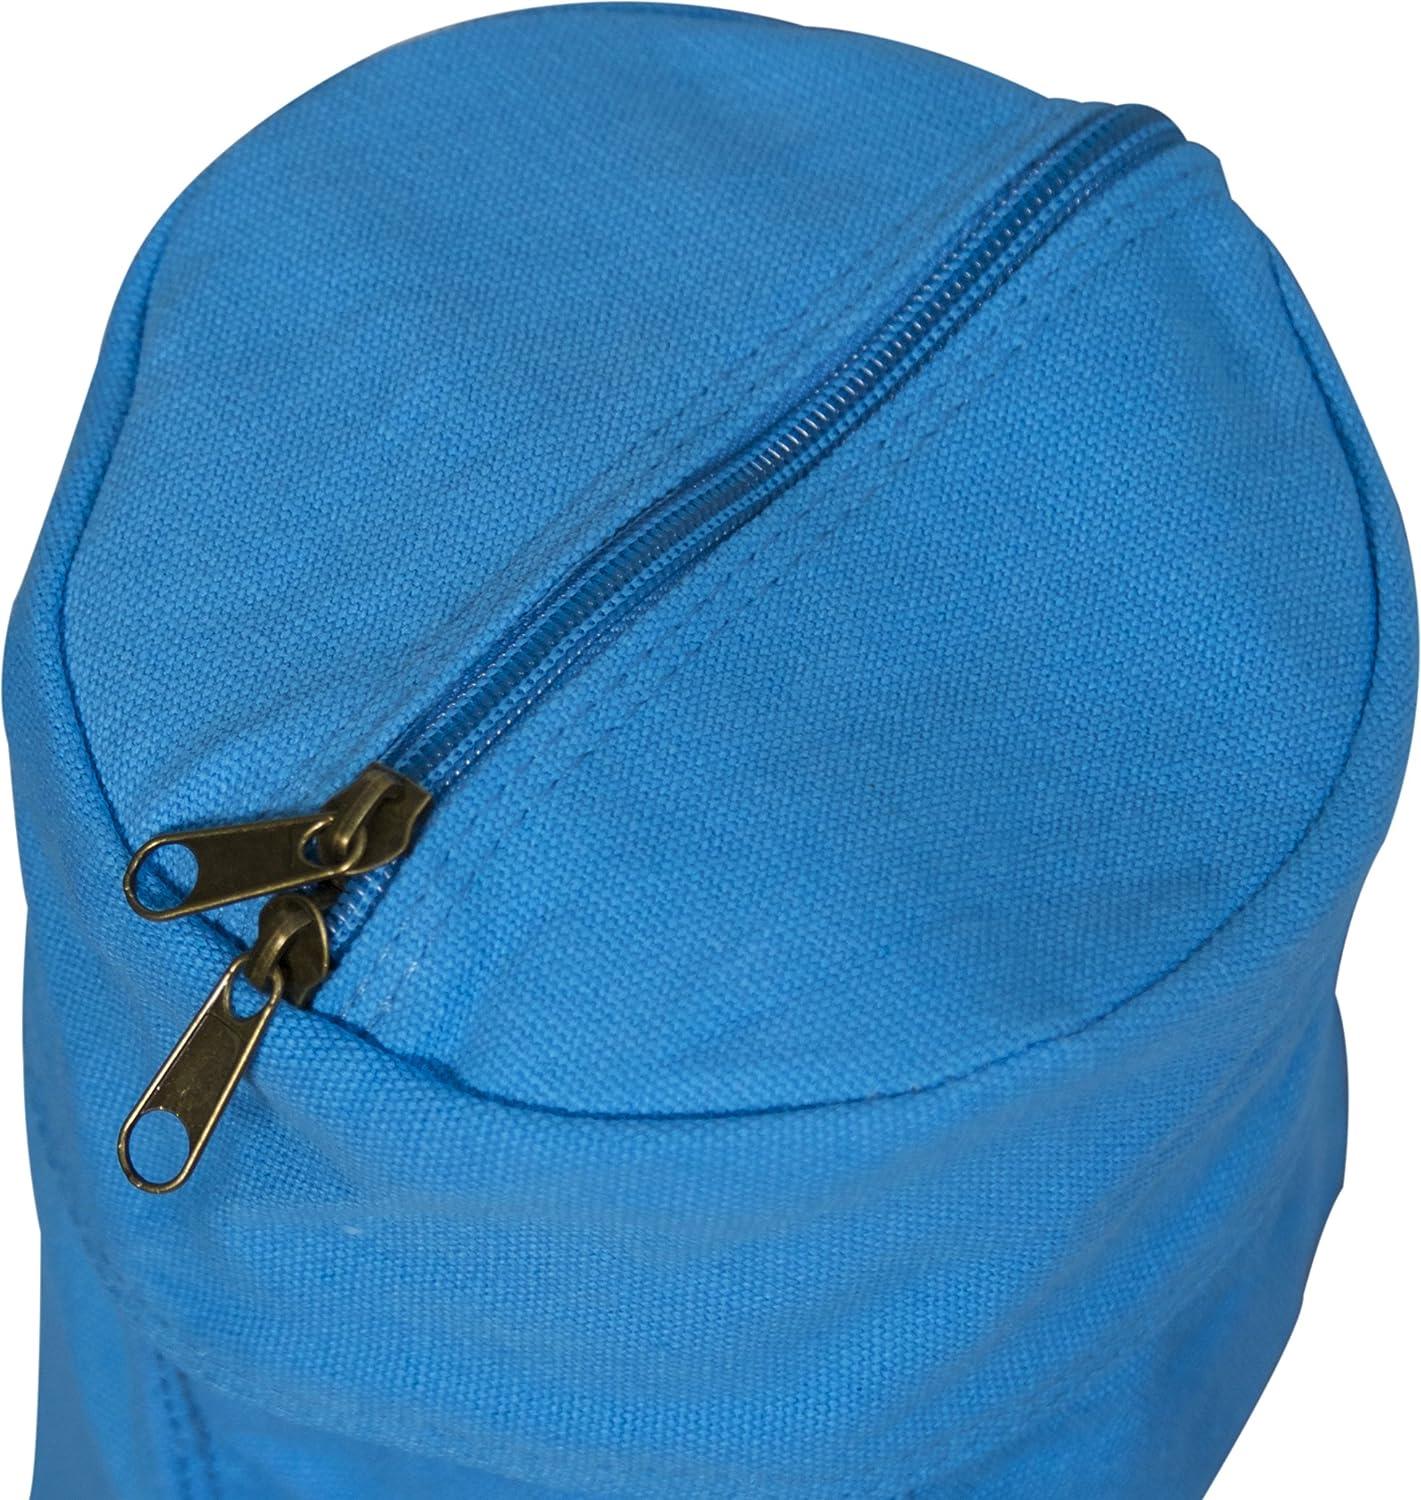 FIT SPIRIT Exercise Yoga Mat Gym Bag with 2 Cargo Pockets Blue Tree